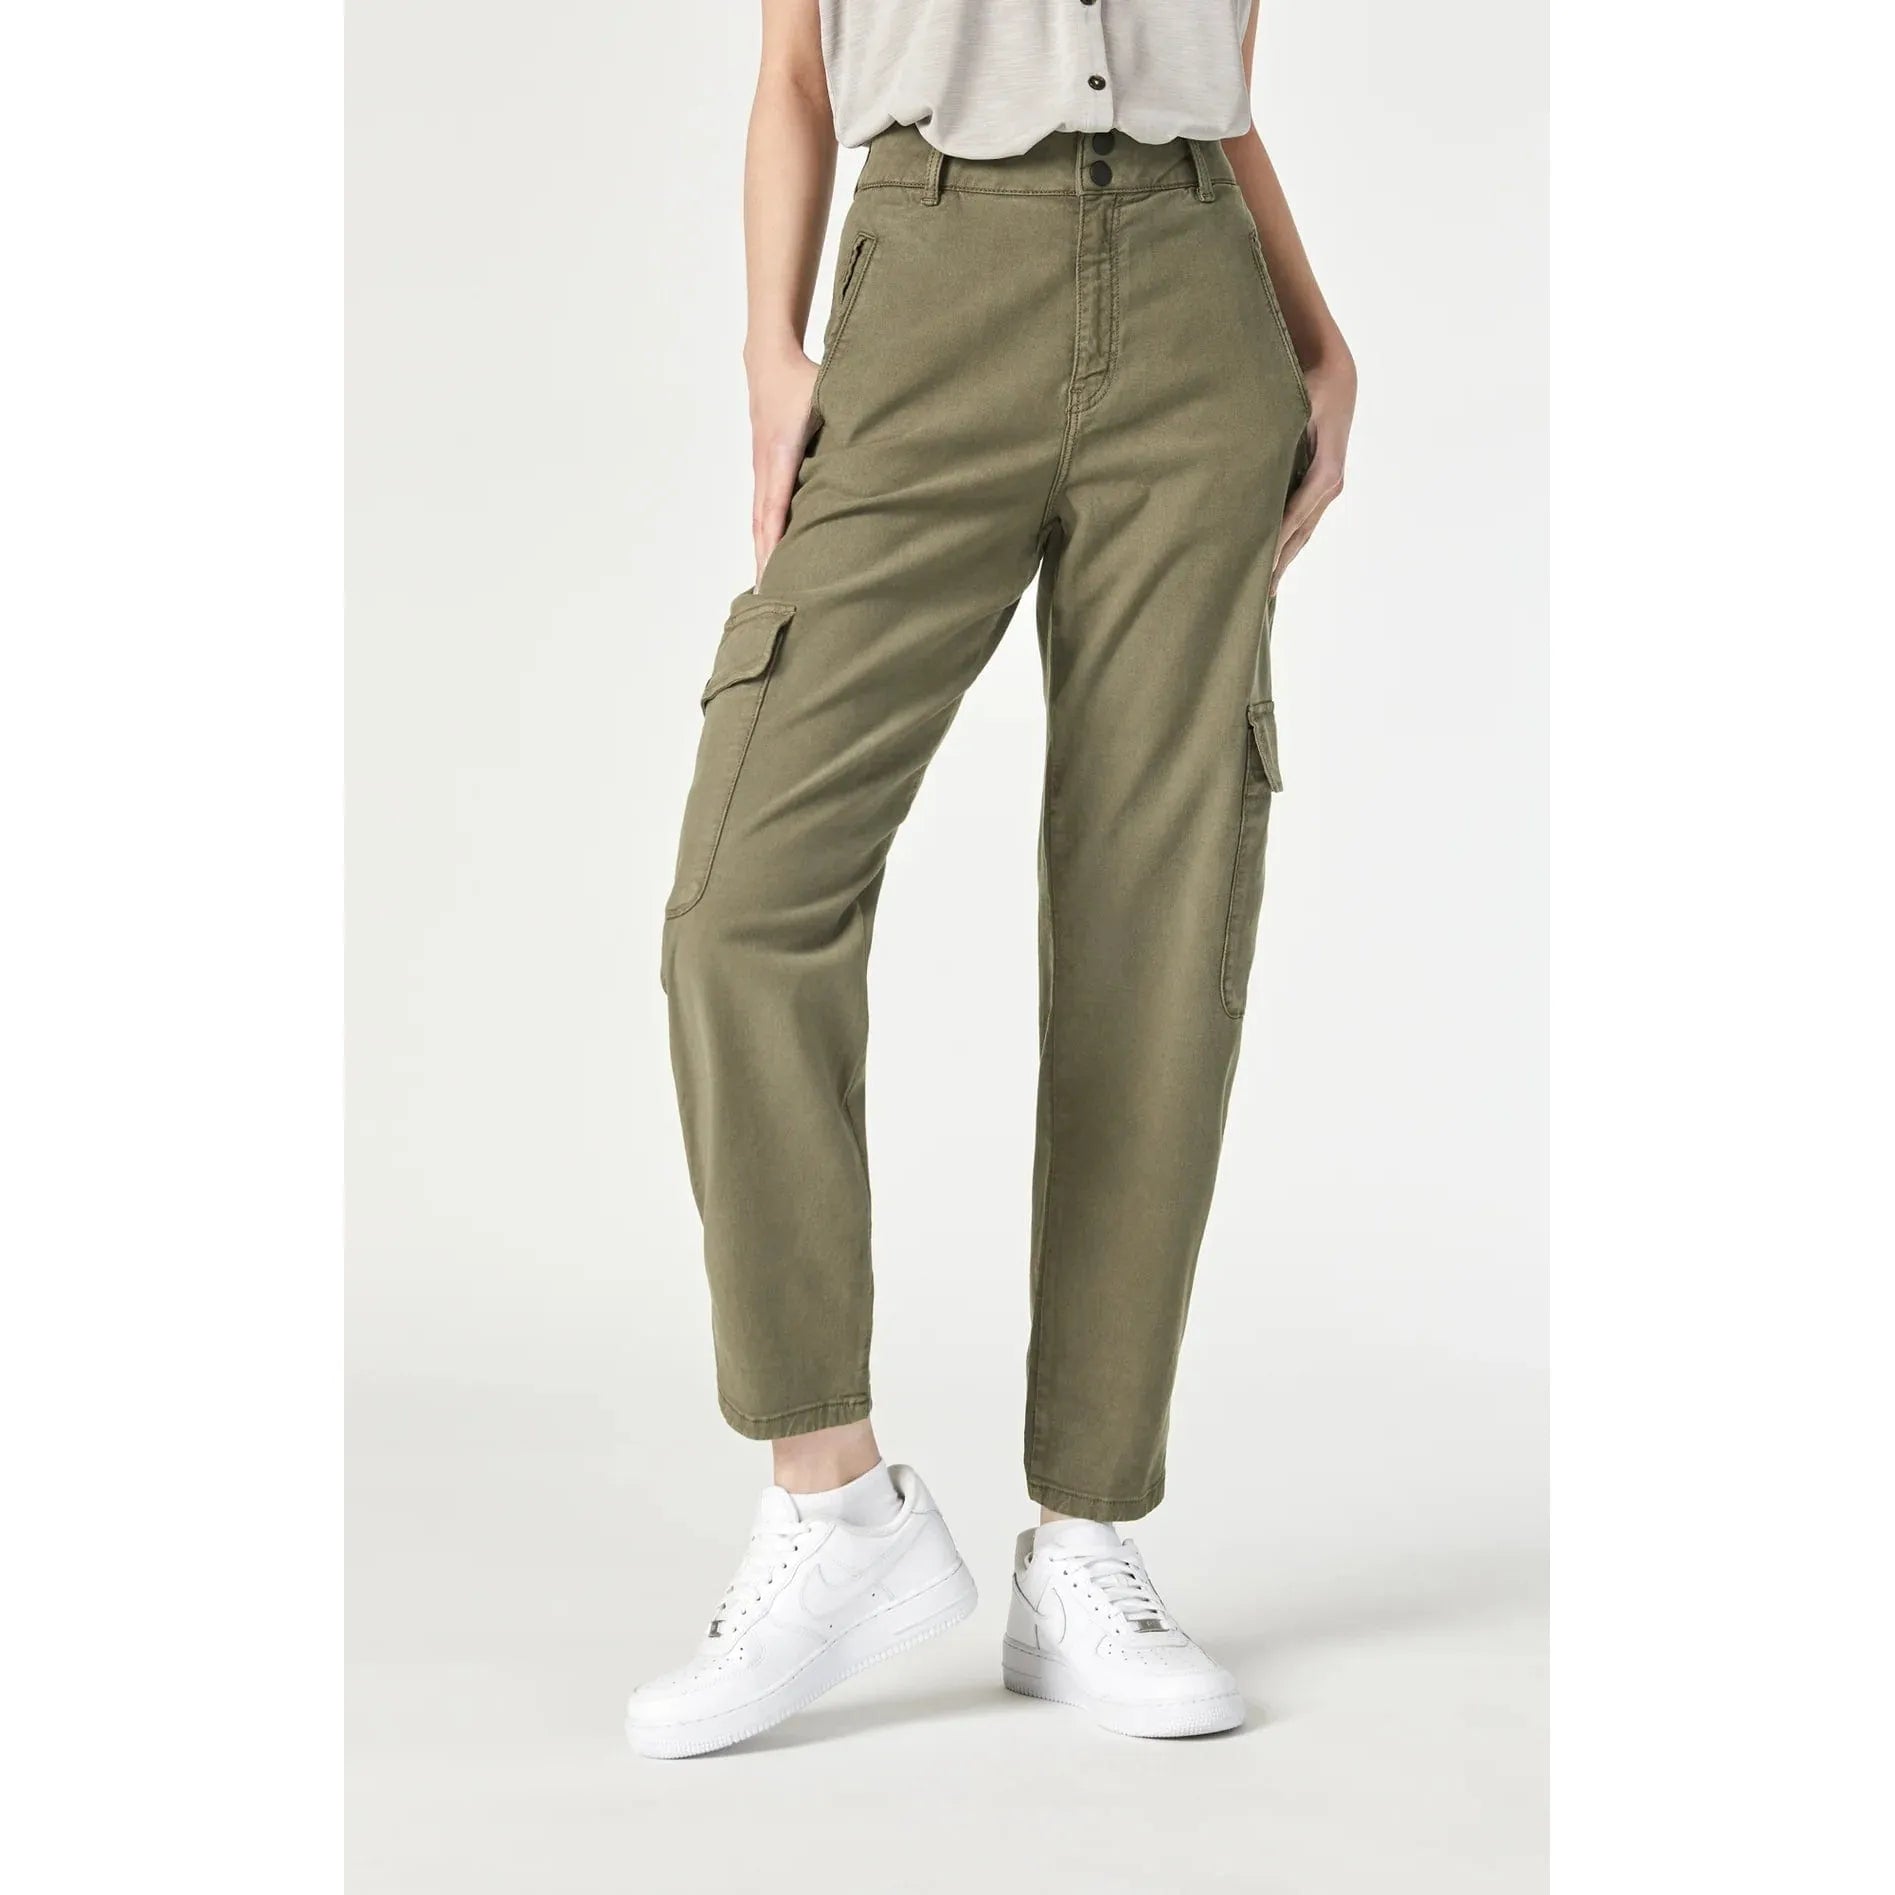 UEU Women's Pants On Sale Up To 90% Off Retail